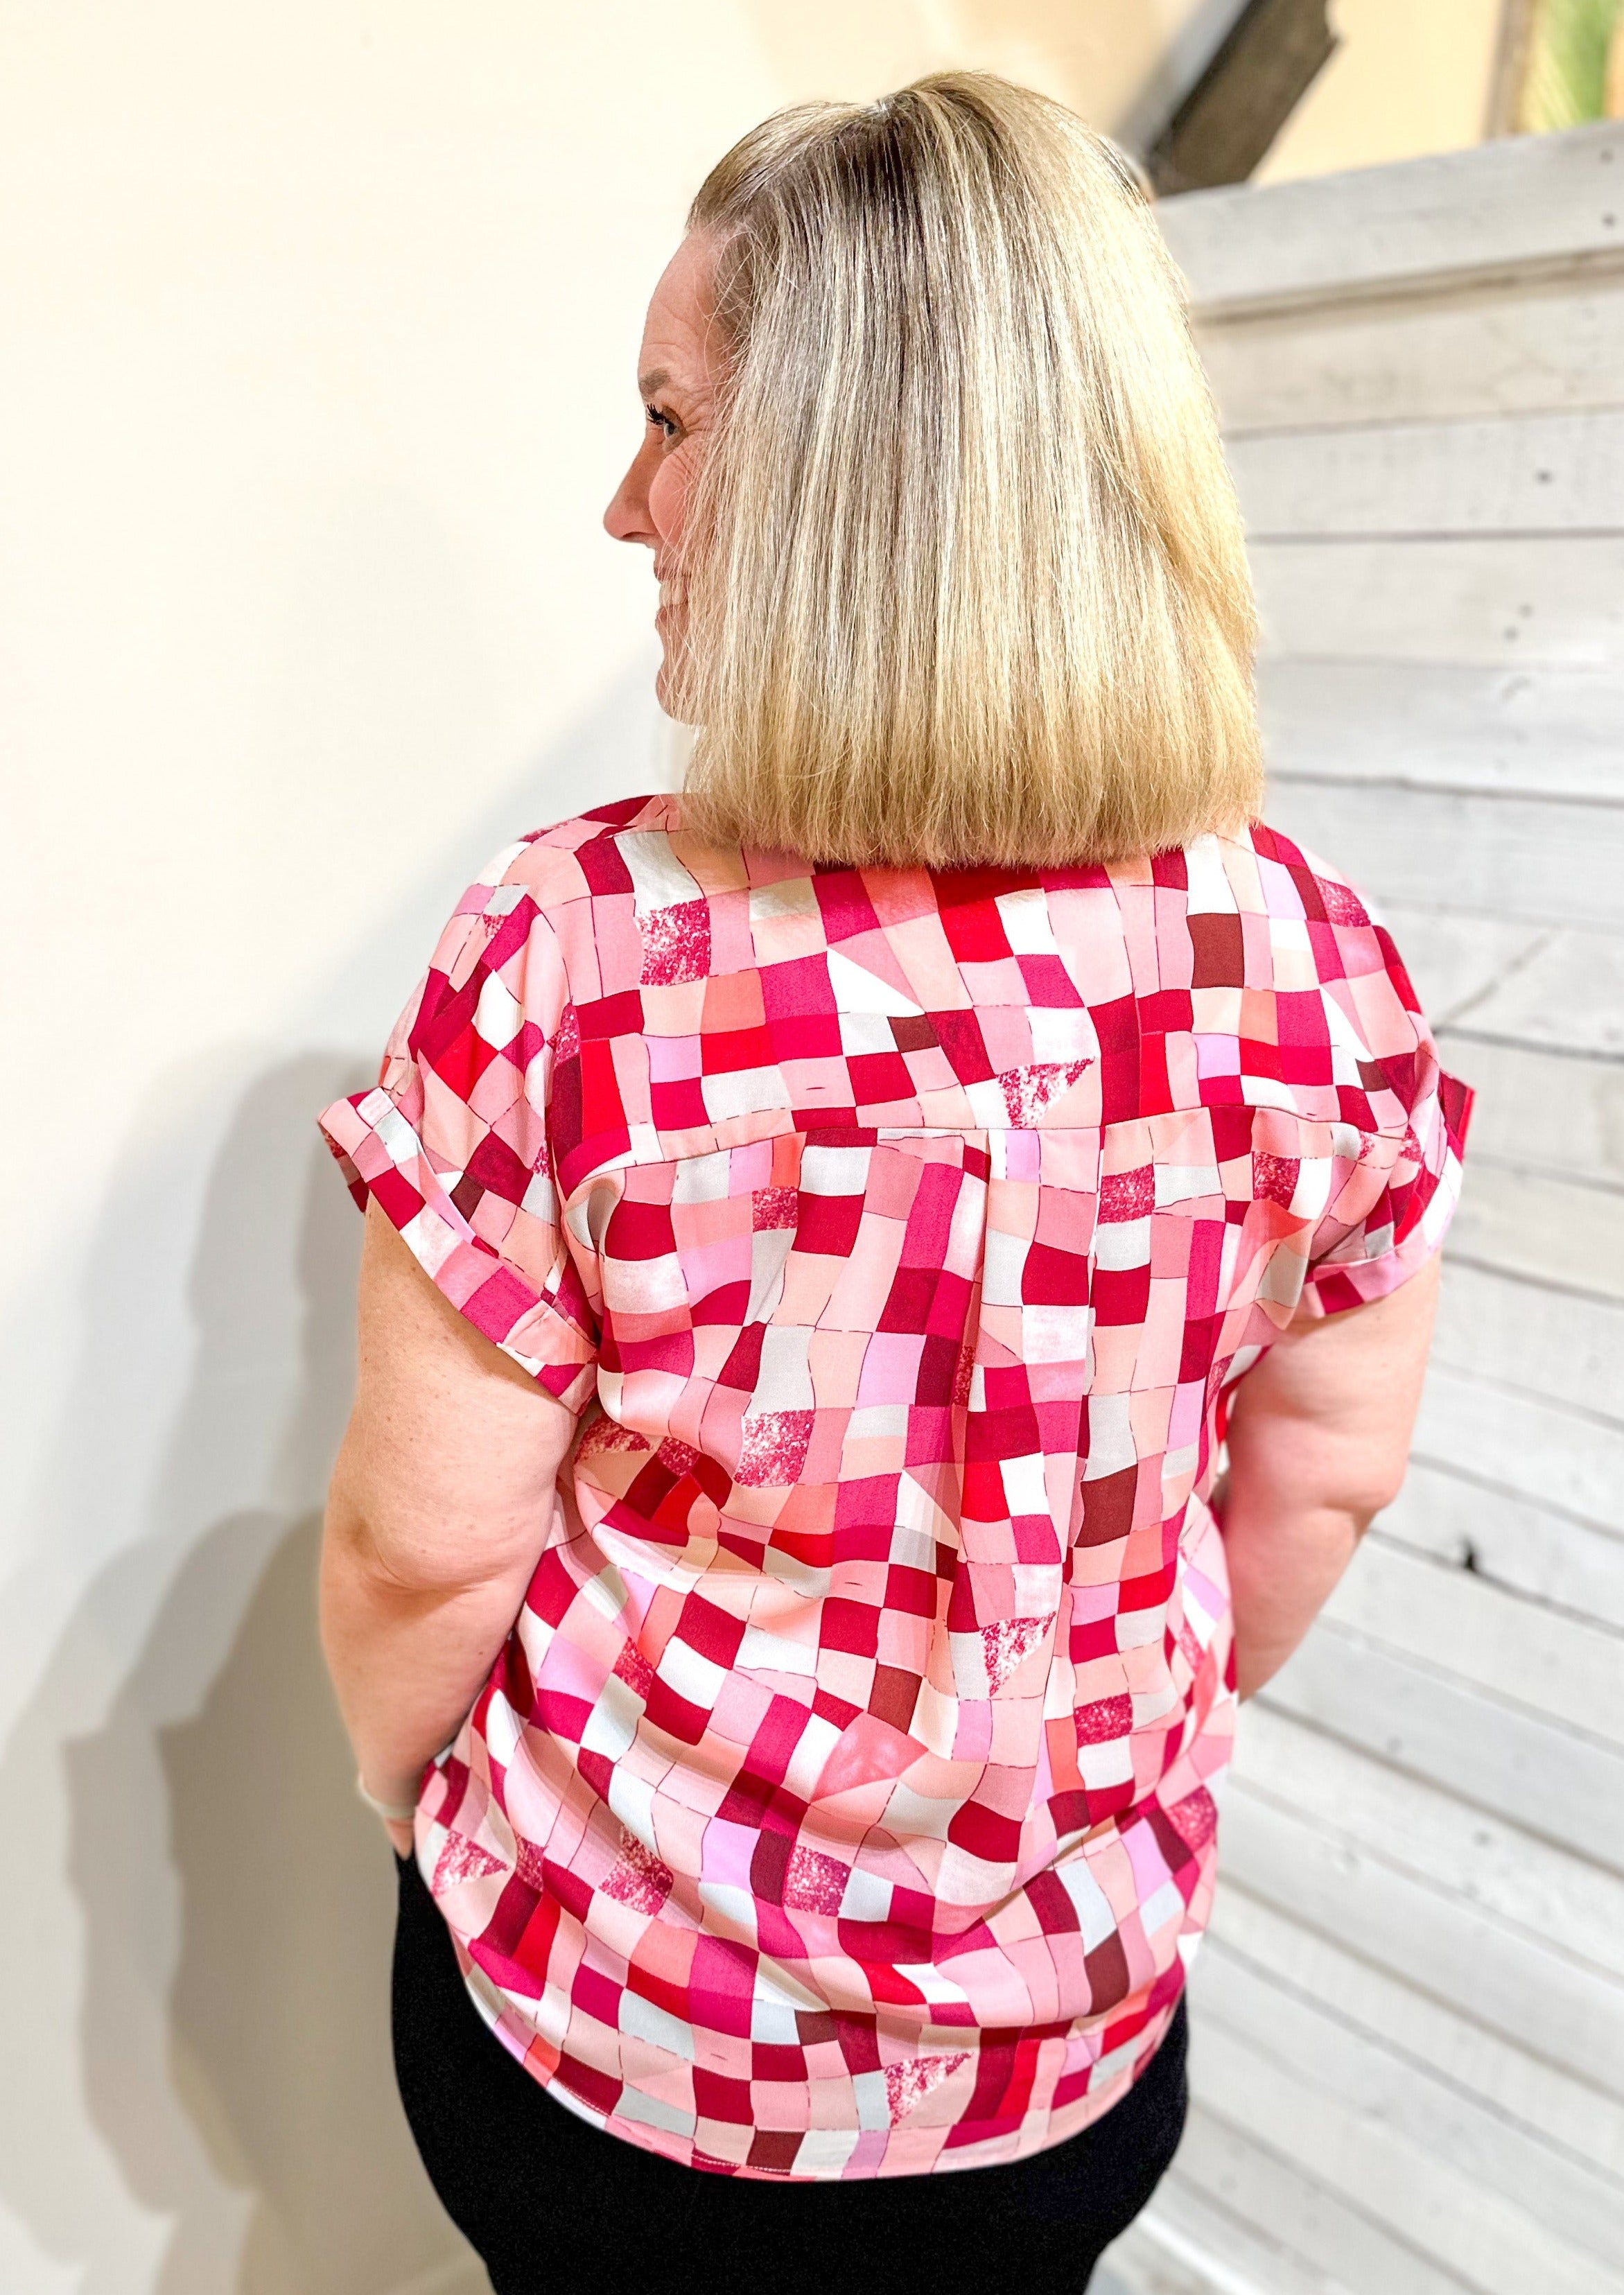 Back view of V-neck top with a drop shoulder sleeve. The pattern is an abstract and geometric mix of white, light pinks and dark pinks.